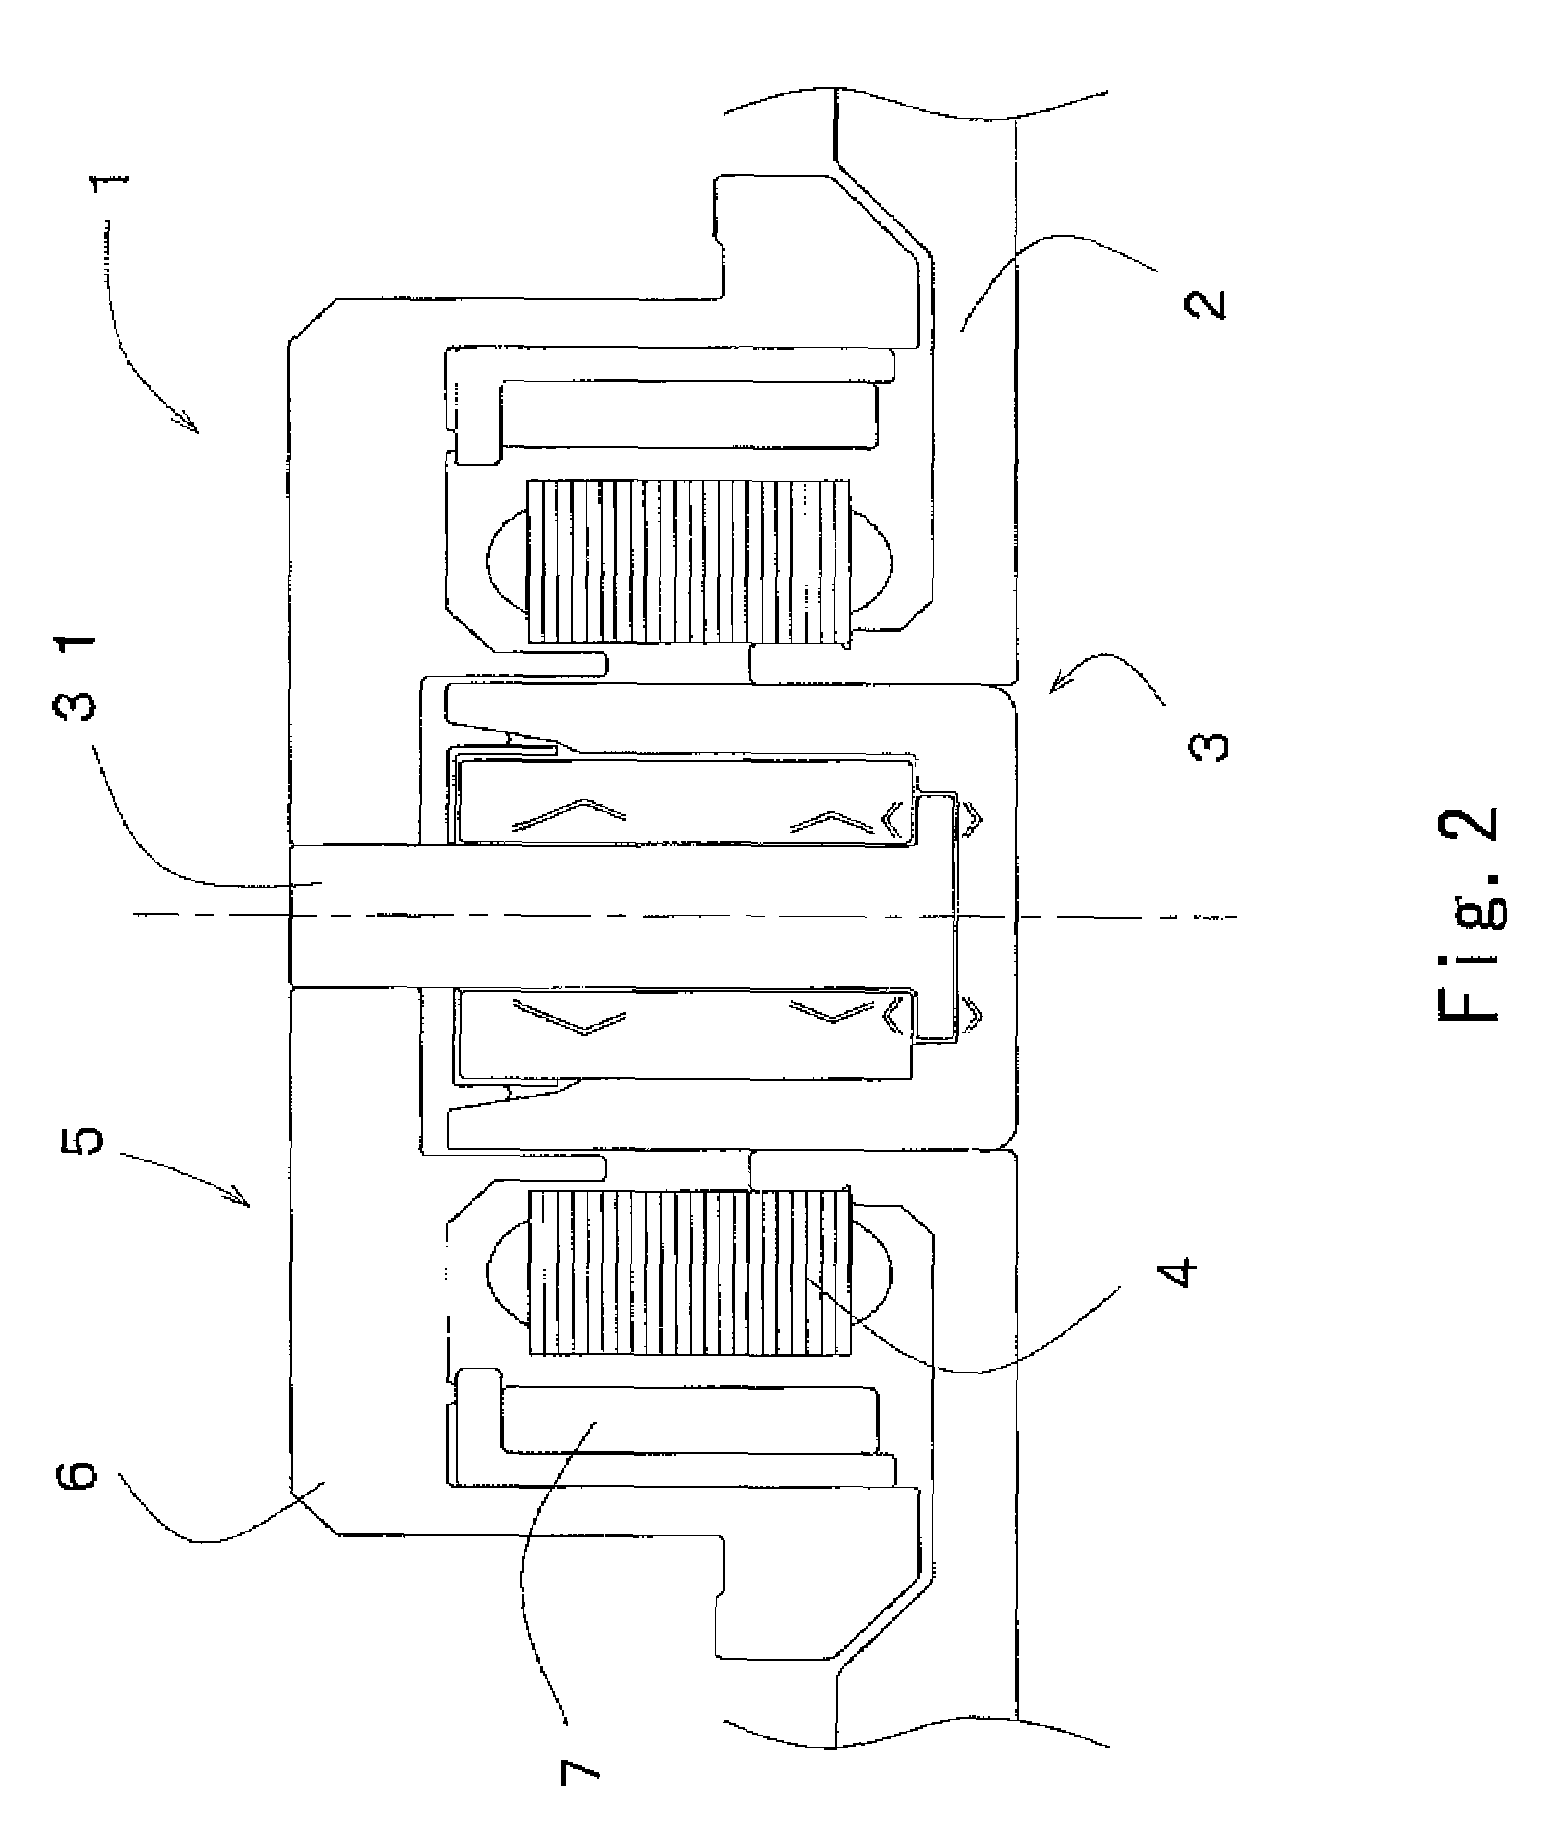 Fluid dynamic pressure bearing and spindle motor